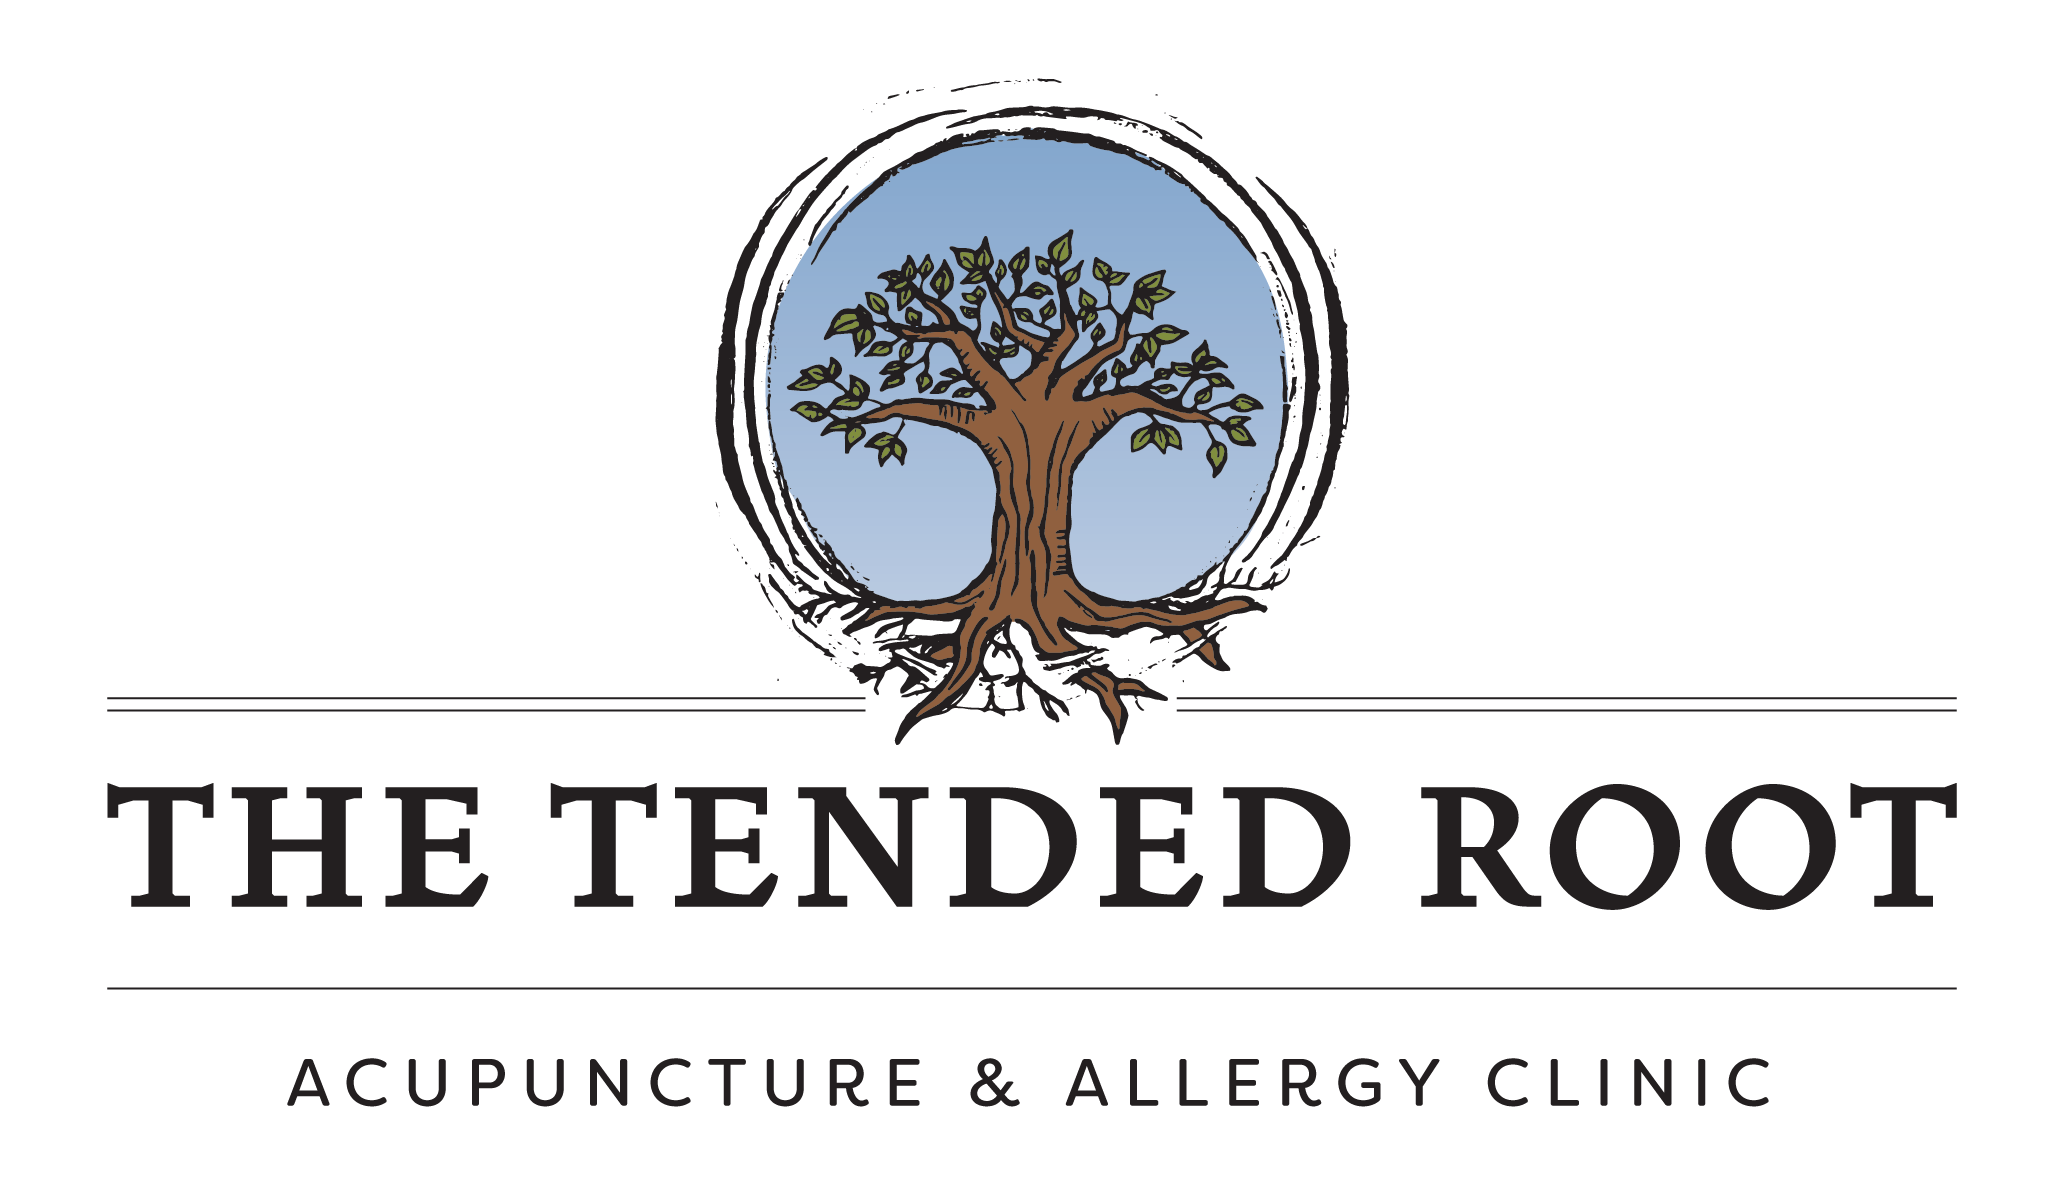 The Tended Root